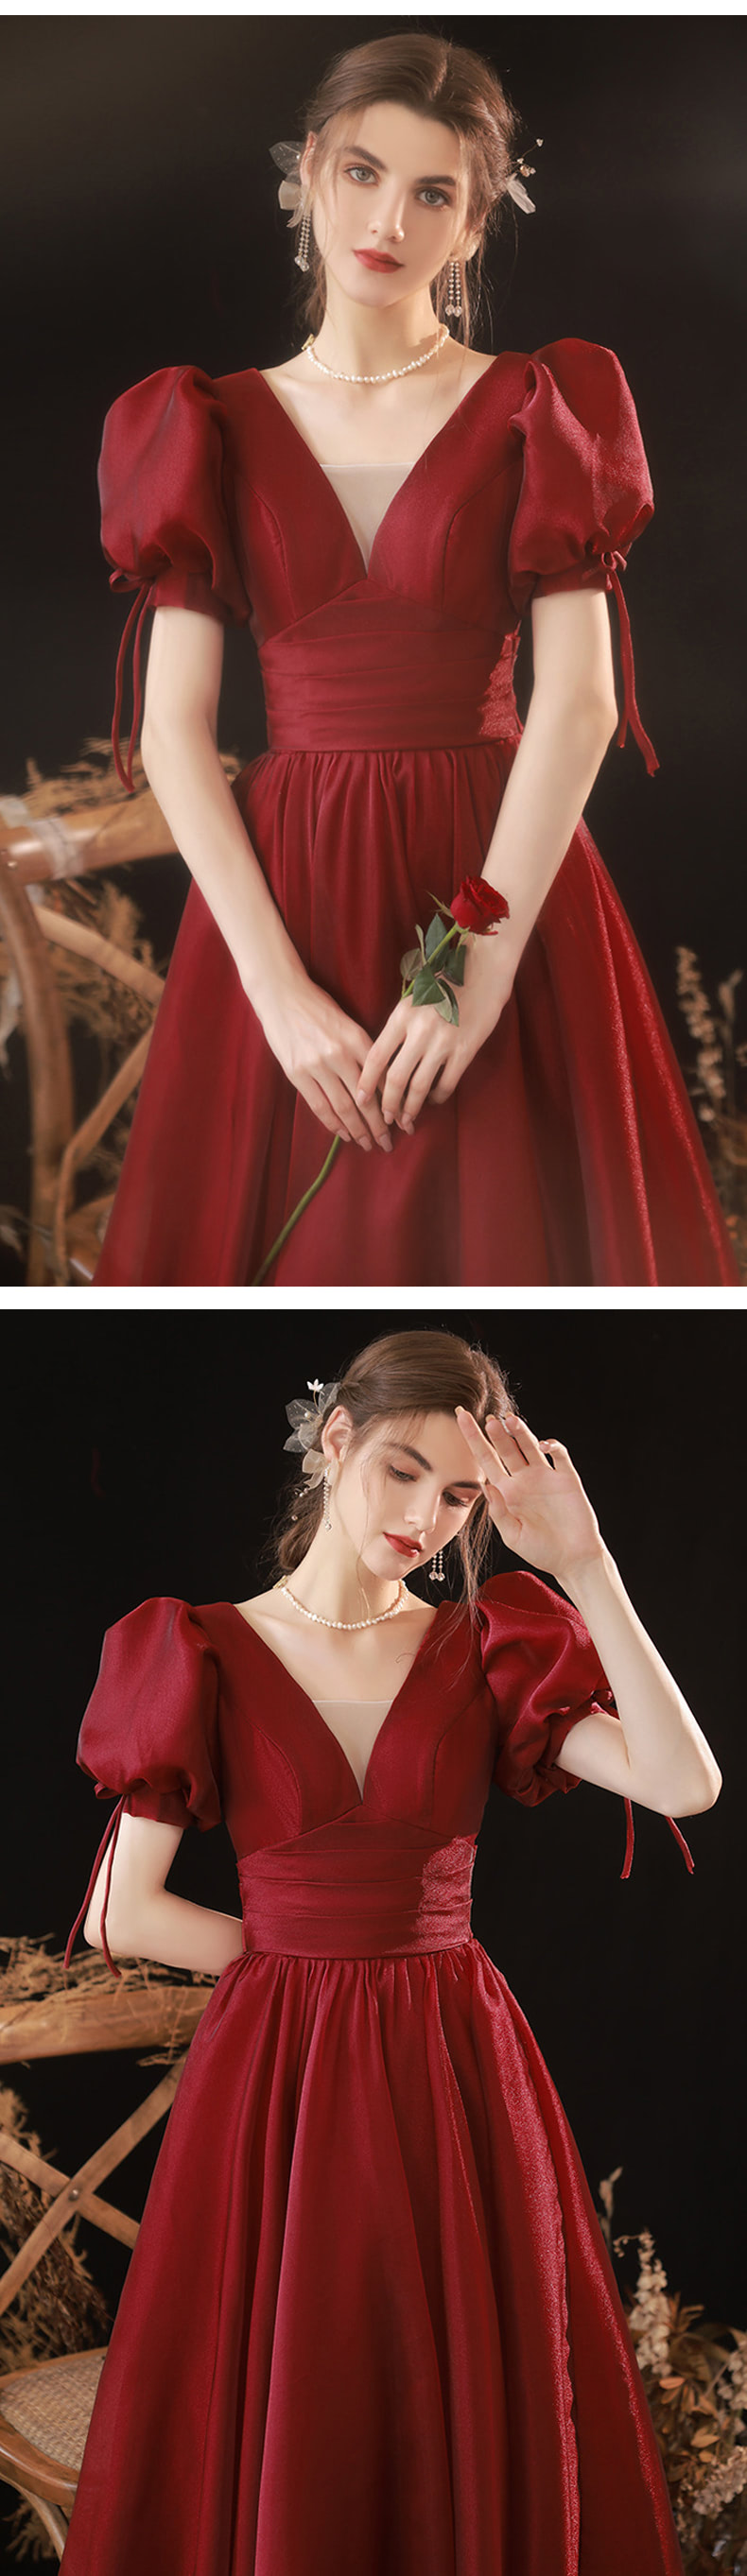 V-Neck-Short-Puff-Sleeve-Red-Prom-Party-Banquet-Evening-Dress08.jpg